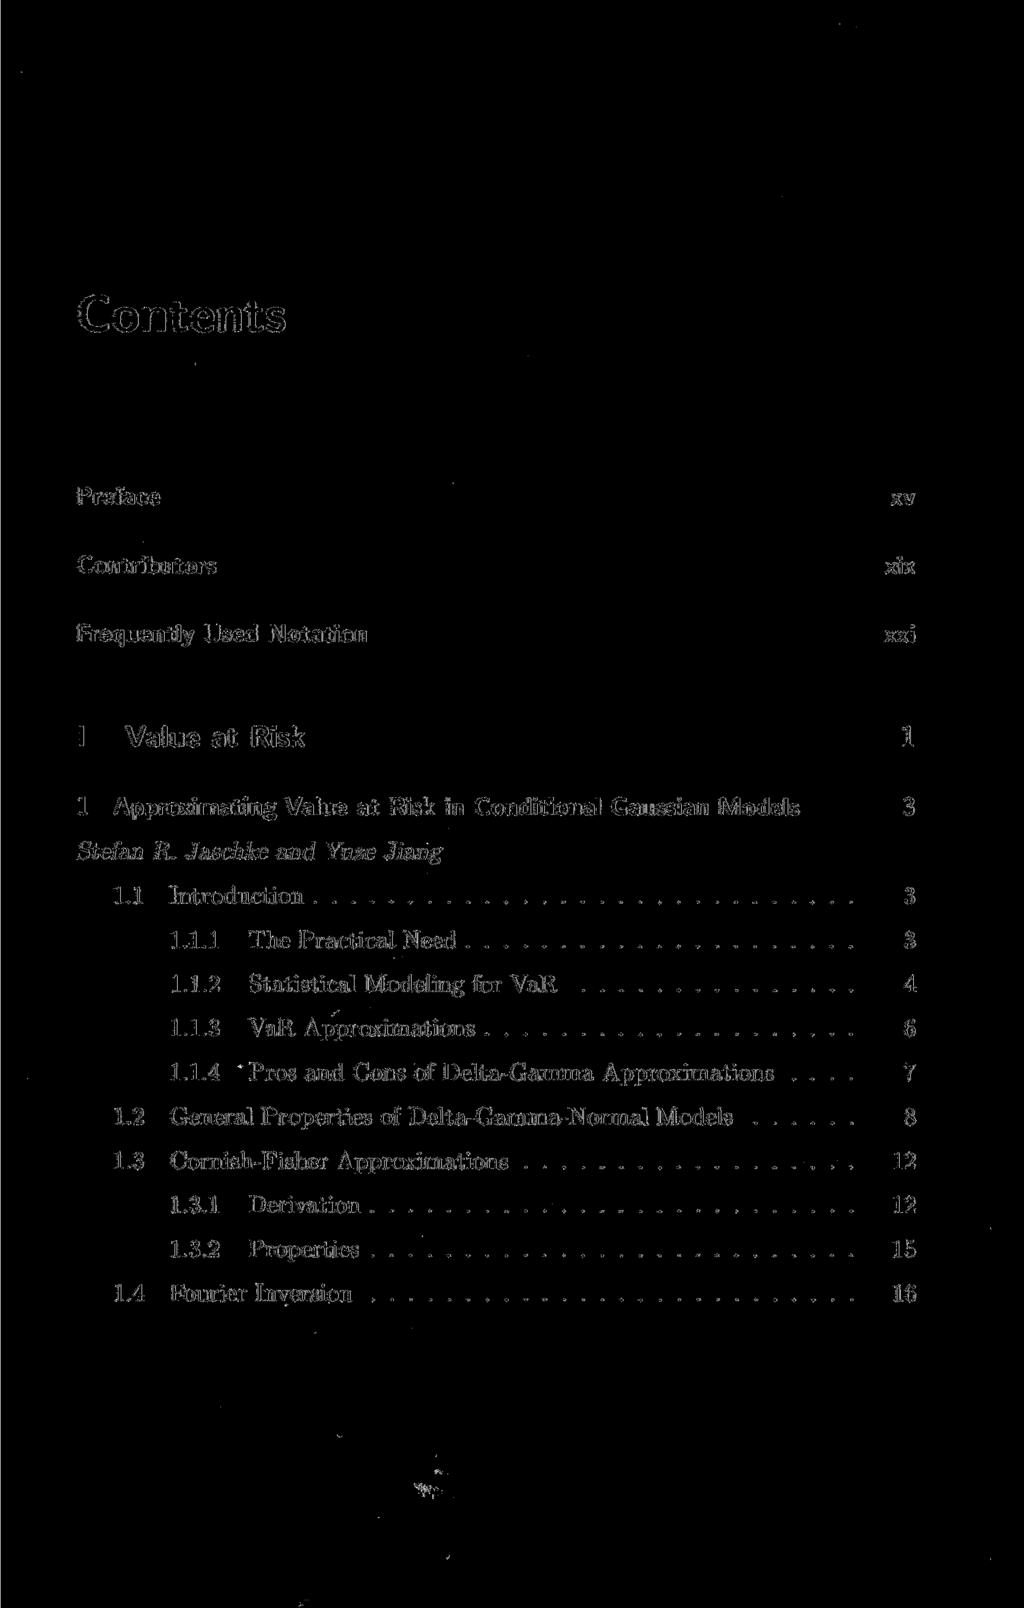 Preface xv Contributors xix Frequently Used Notation xxi I Value at Risk 1 1 Approximating Value at Risk in Conditional Gaussian Models 3 Stefan R. Jaschke and Yuze Jiang 1.1 Introduction 3 1.1.1 The Practical Need 3 1.